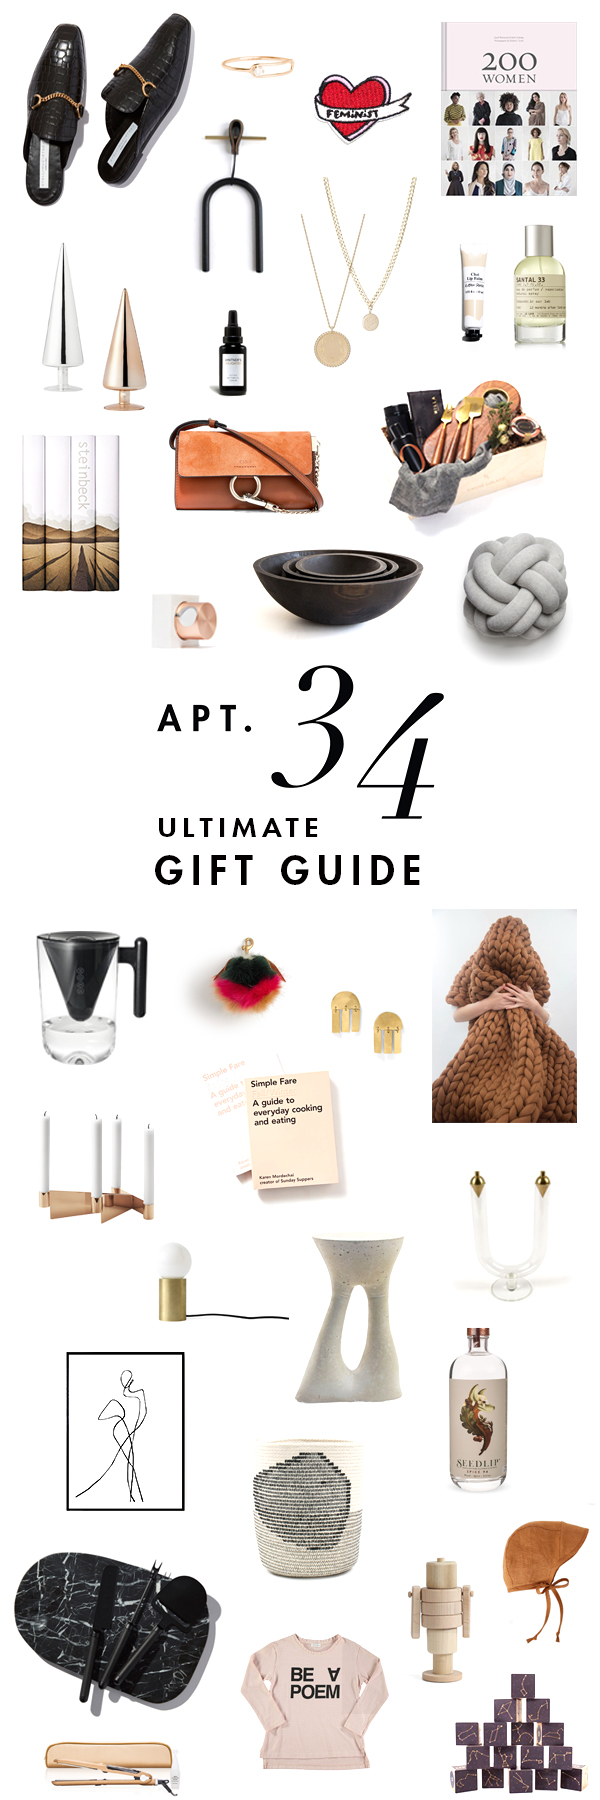 the ultimate gift guide on apartment 34